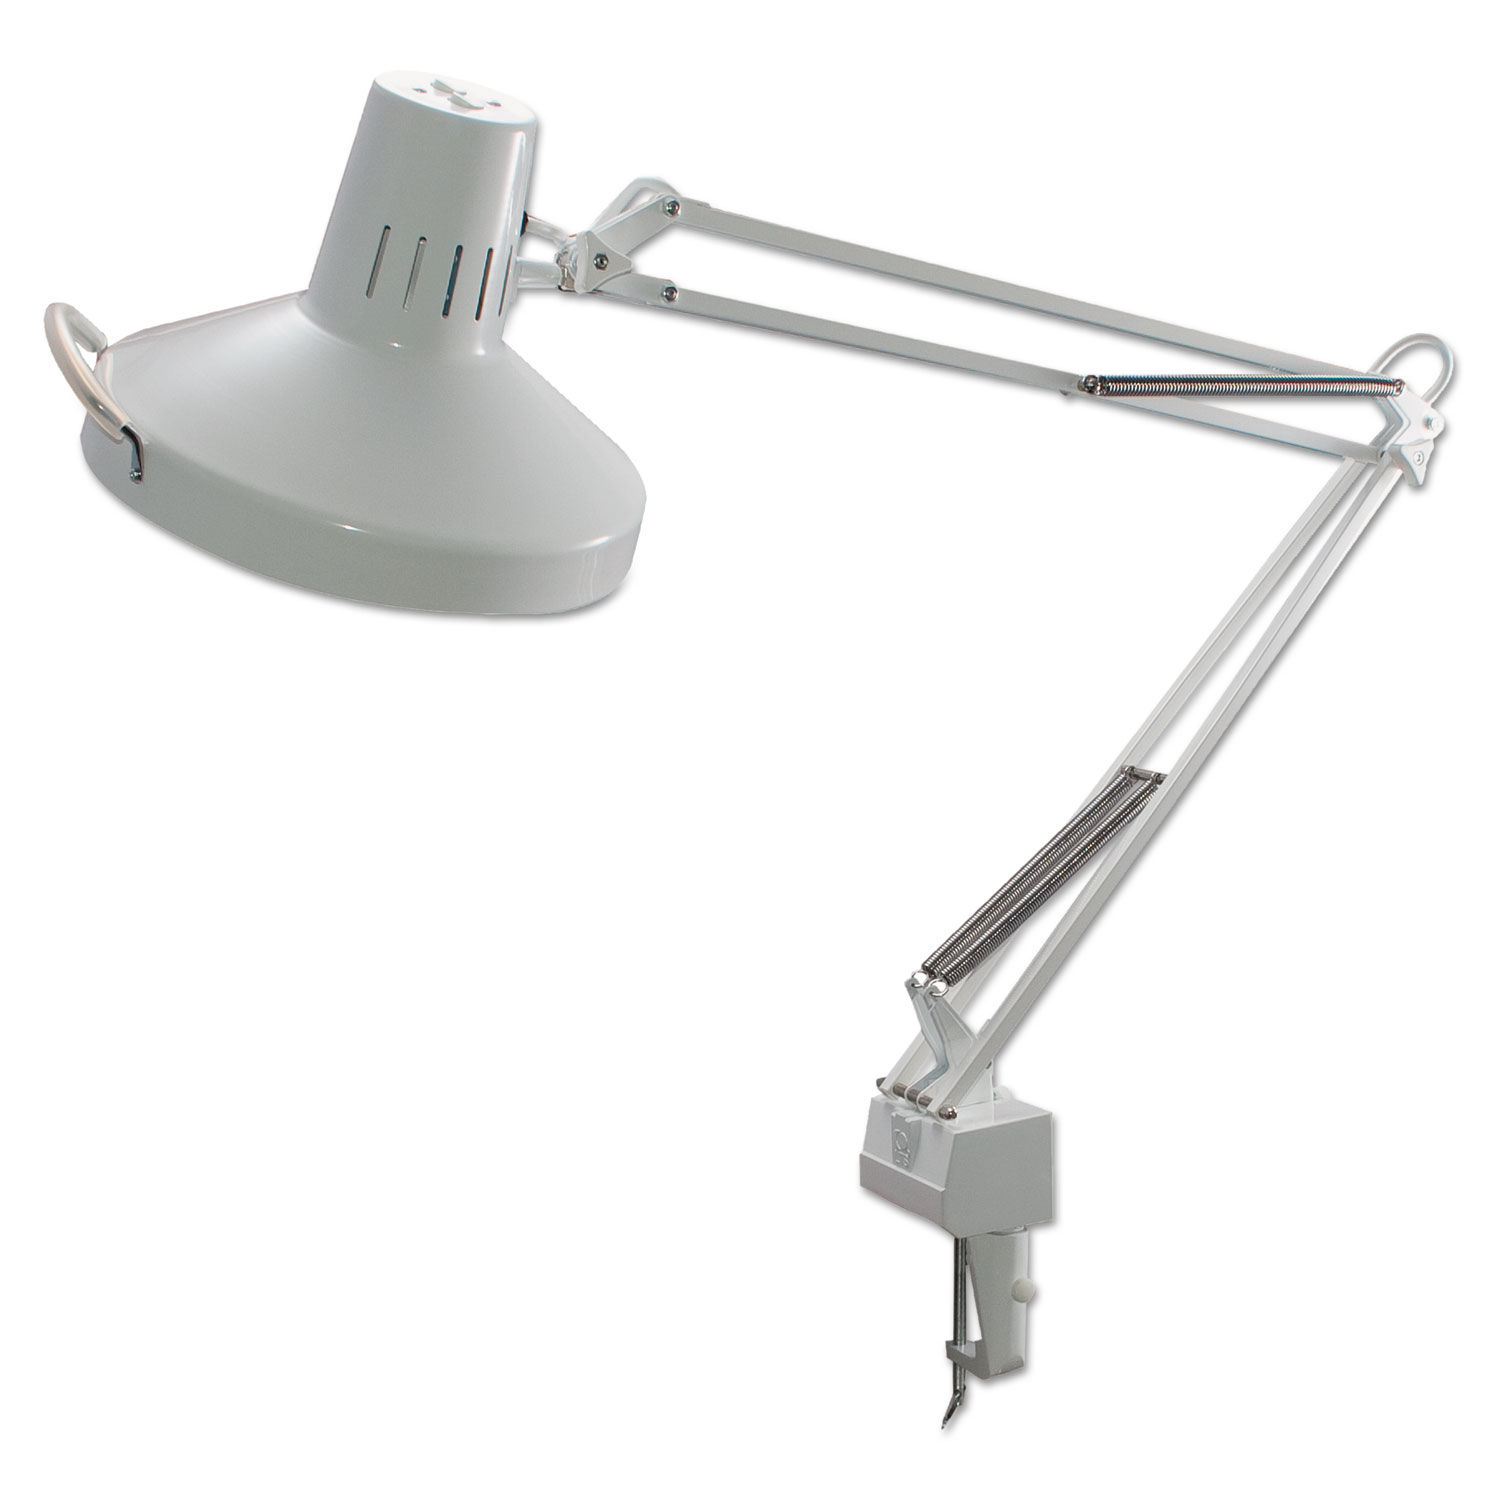 Three-Way Incandescent/Fluorescent Clamp-On Lamp 9.38"w x 9.38"d x 44.5"h, White